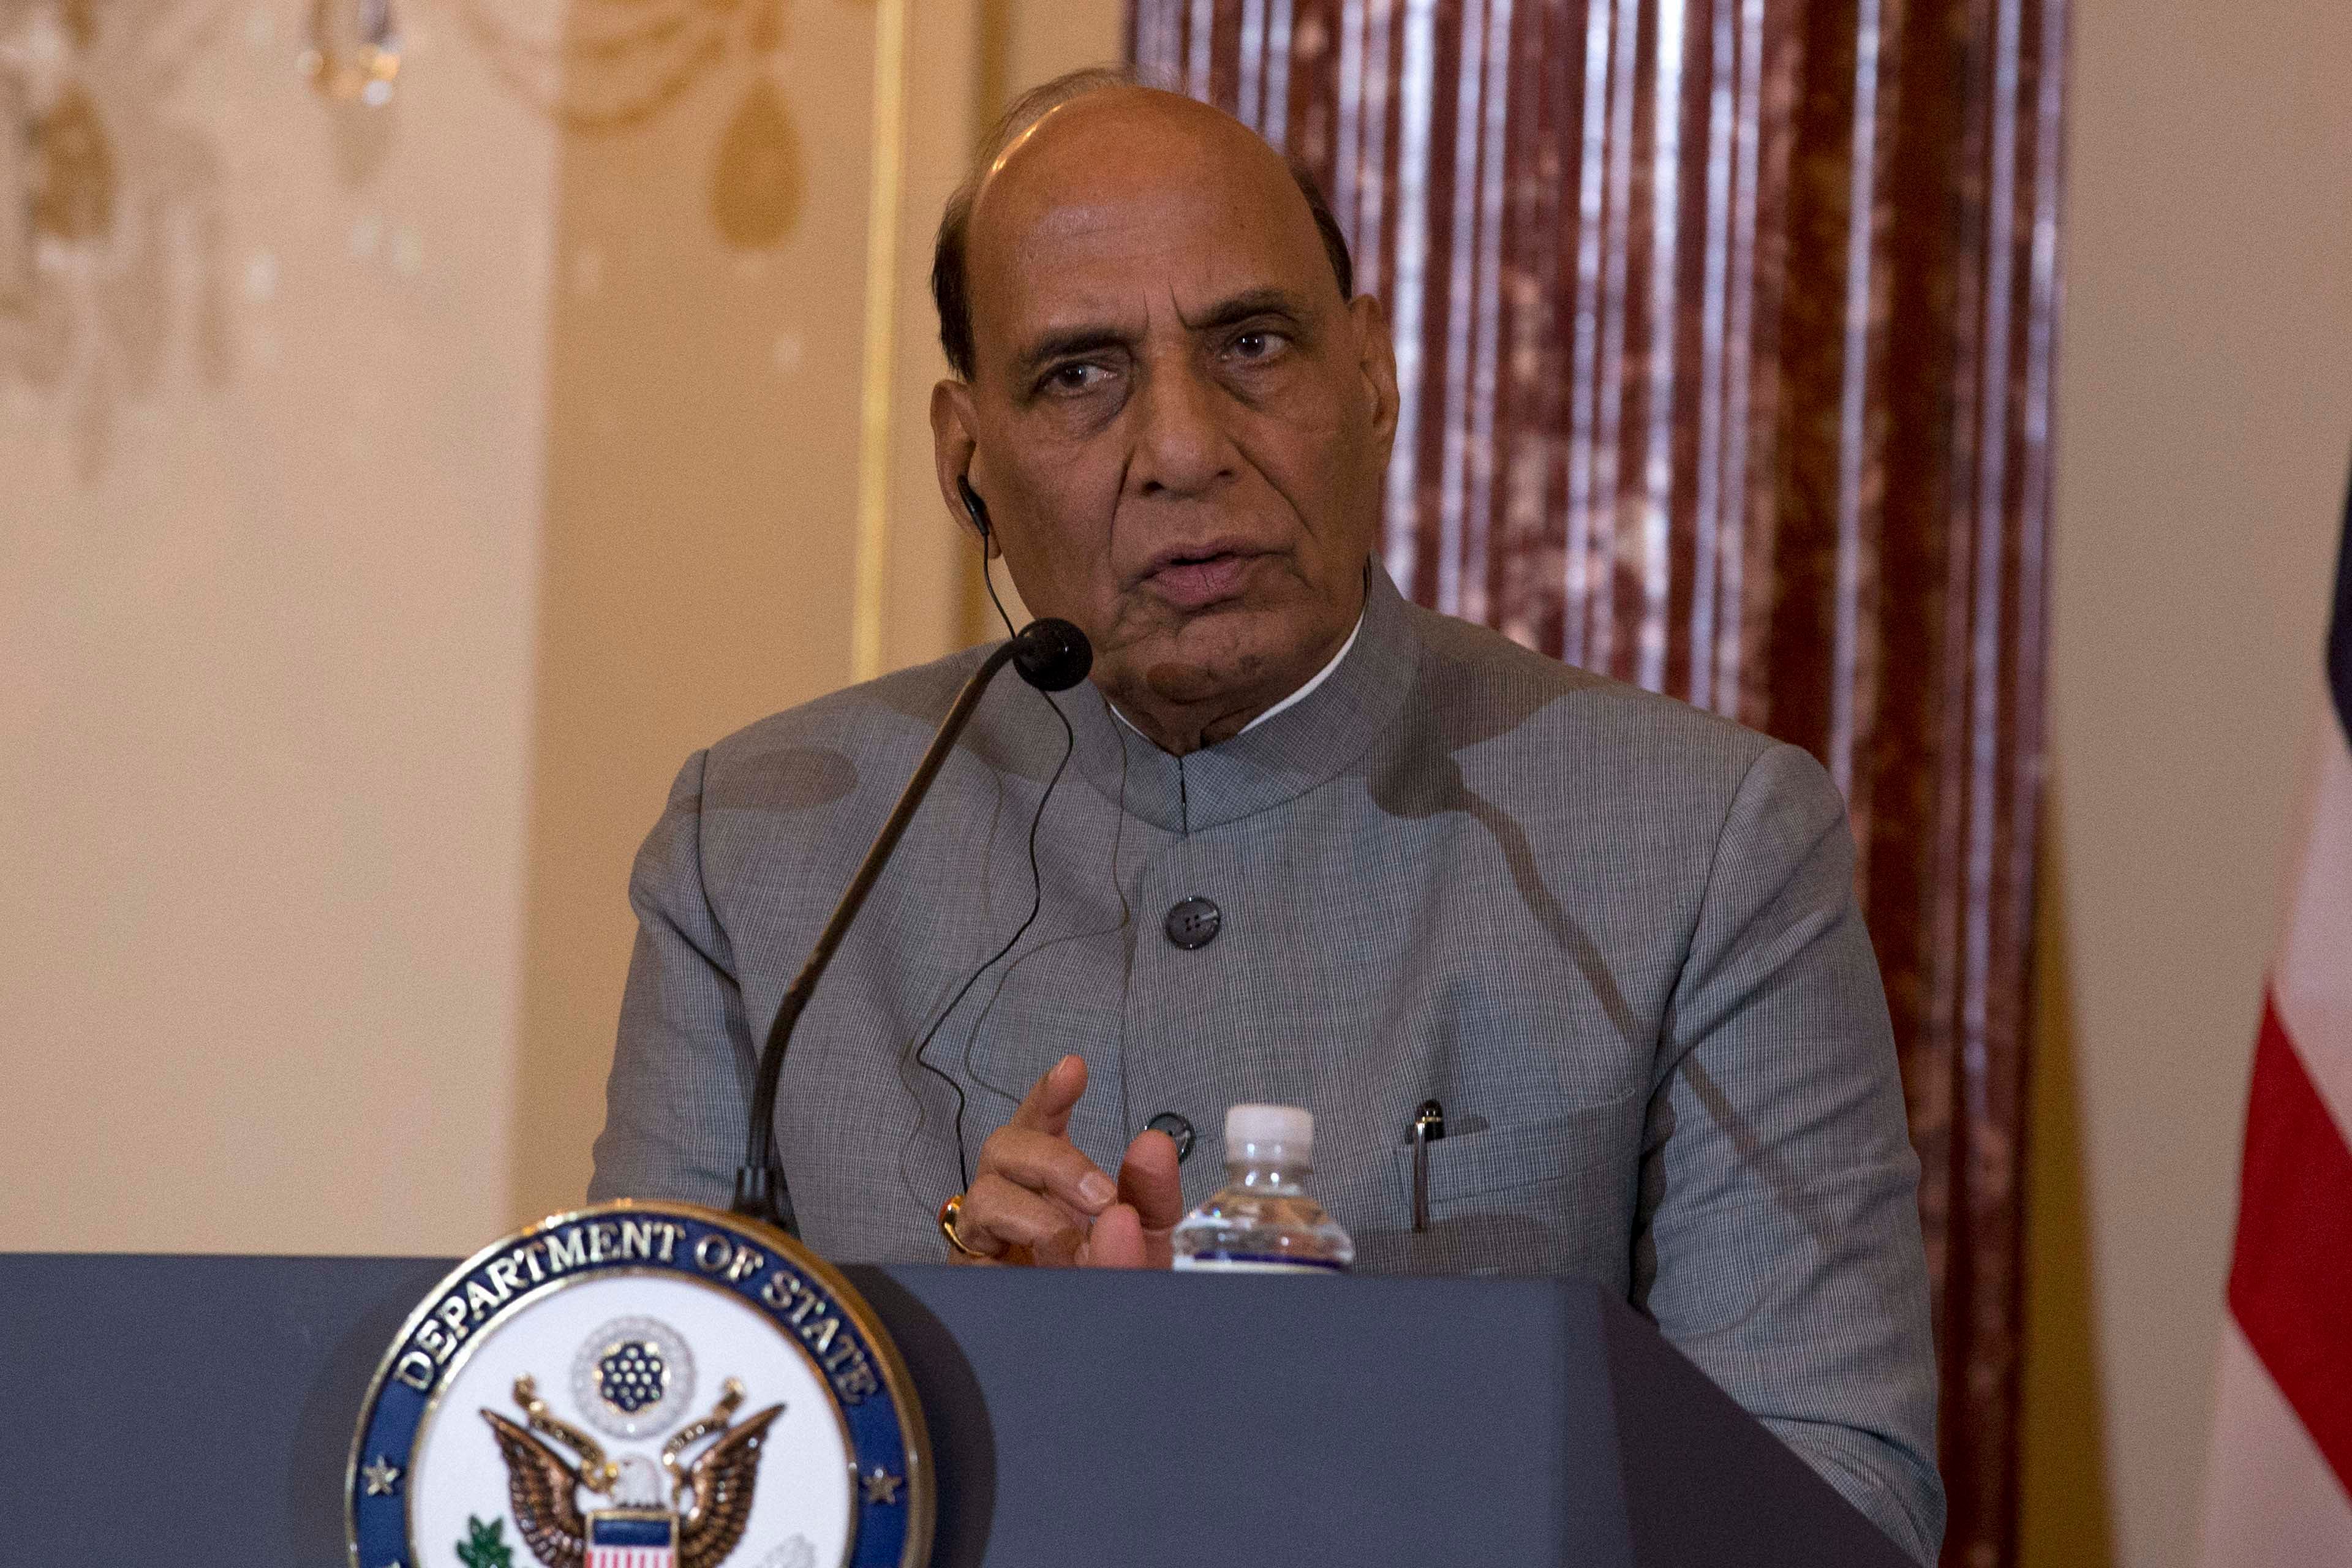 Indian Defense Minister Shri Rajnath Singh, speaks during a news conference after a bilateral meeting between the U.S. and India at the Department of State in Washington, Wednesday, Dec.18, 2019. AP/PTI